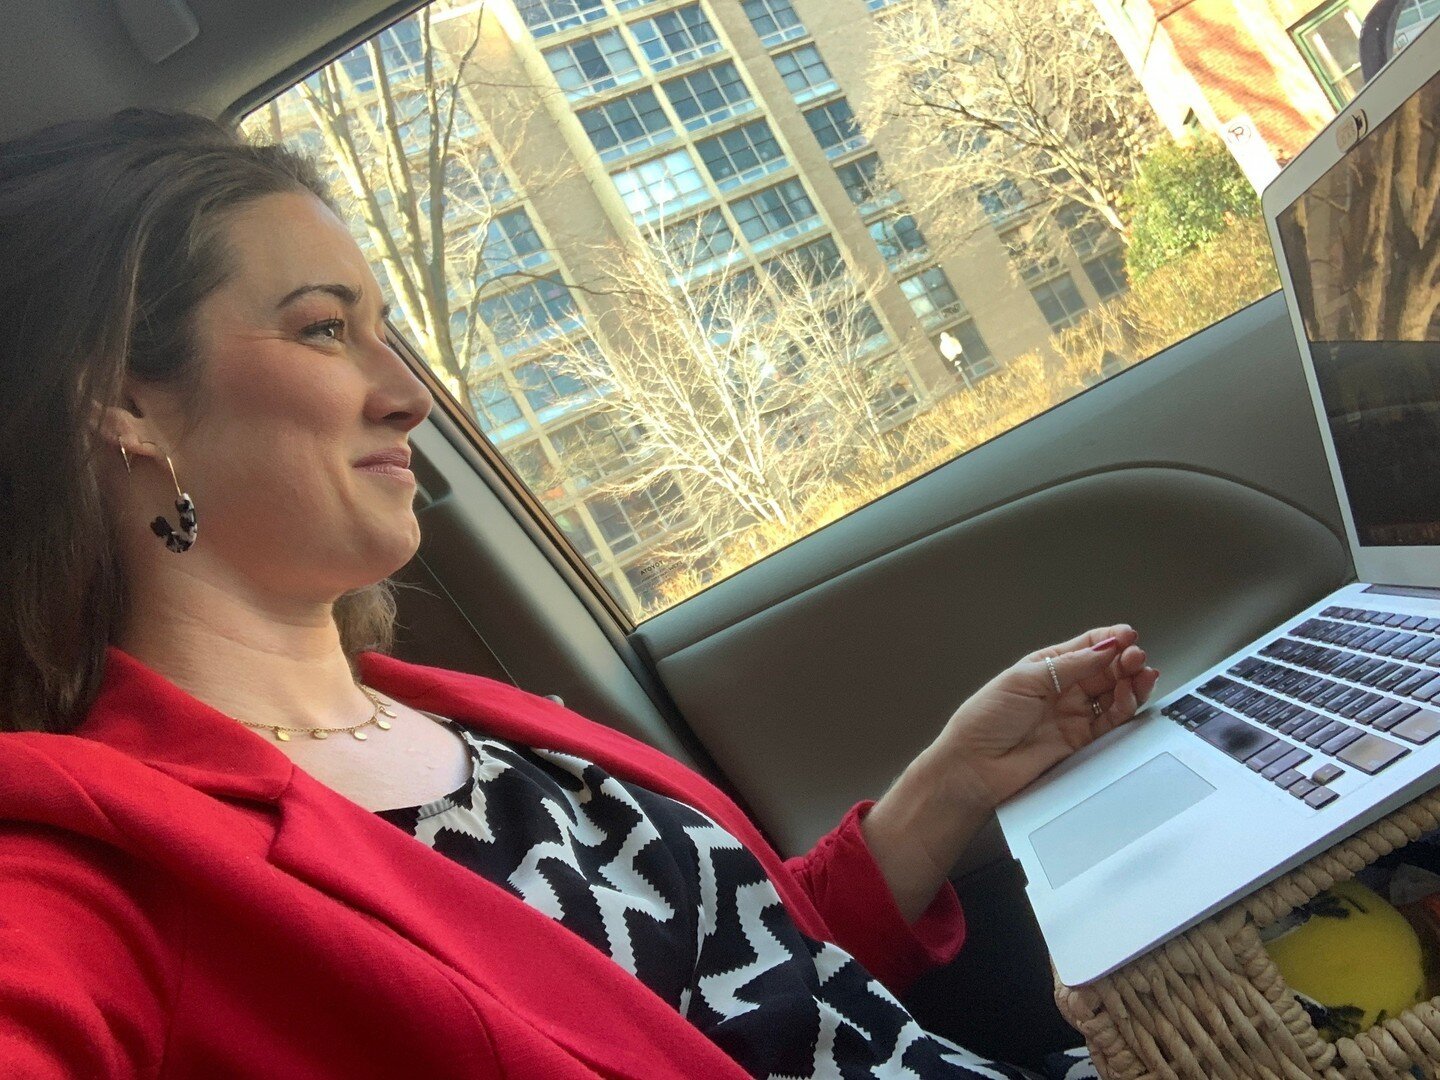 Throwback to a meeting in the car, on the go. (Pro tip: a small basket makes a perfect laptop prop.) ⁠
⁠
#gettingshitdone